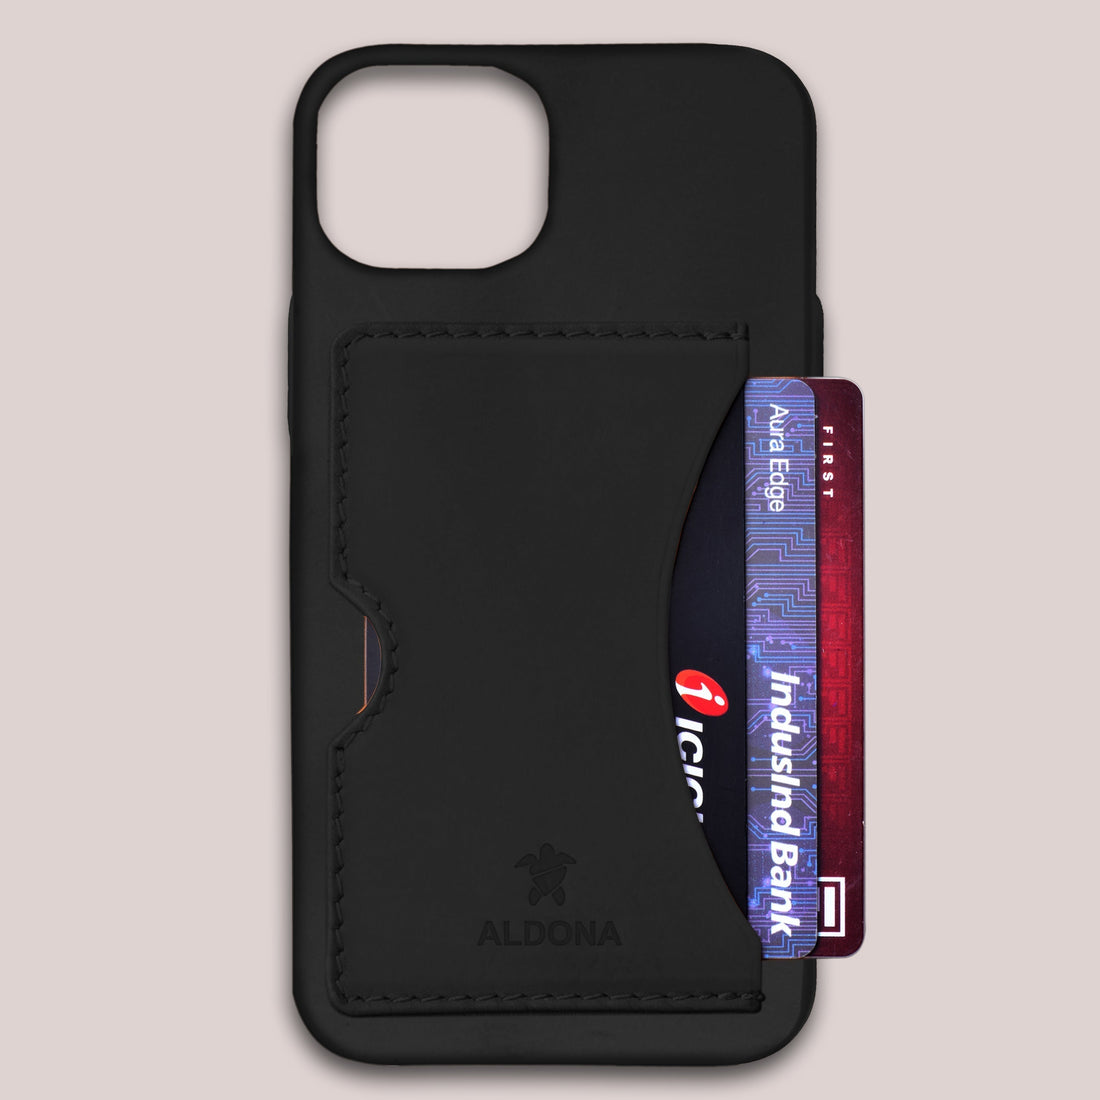 Baxter Card Case for iPhone 13 Pro Max - Burnt Tobacco